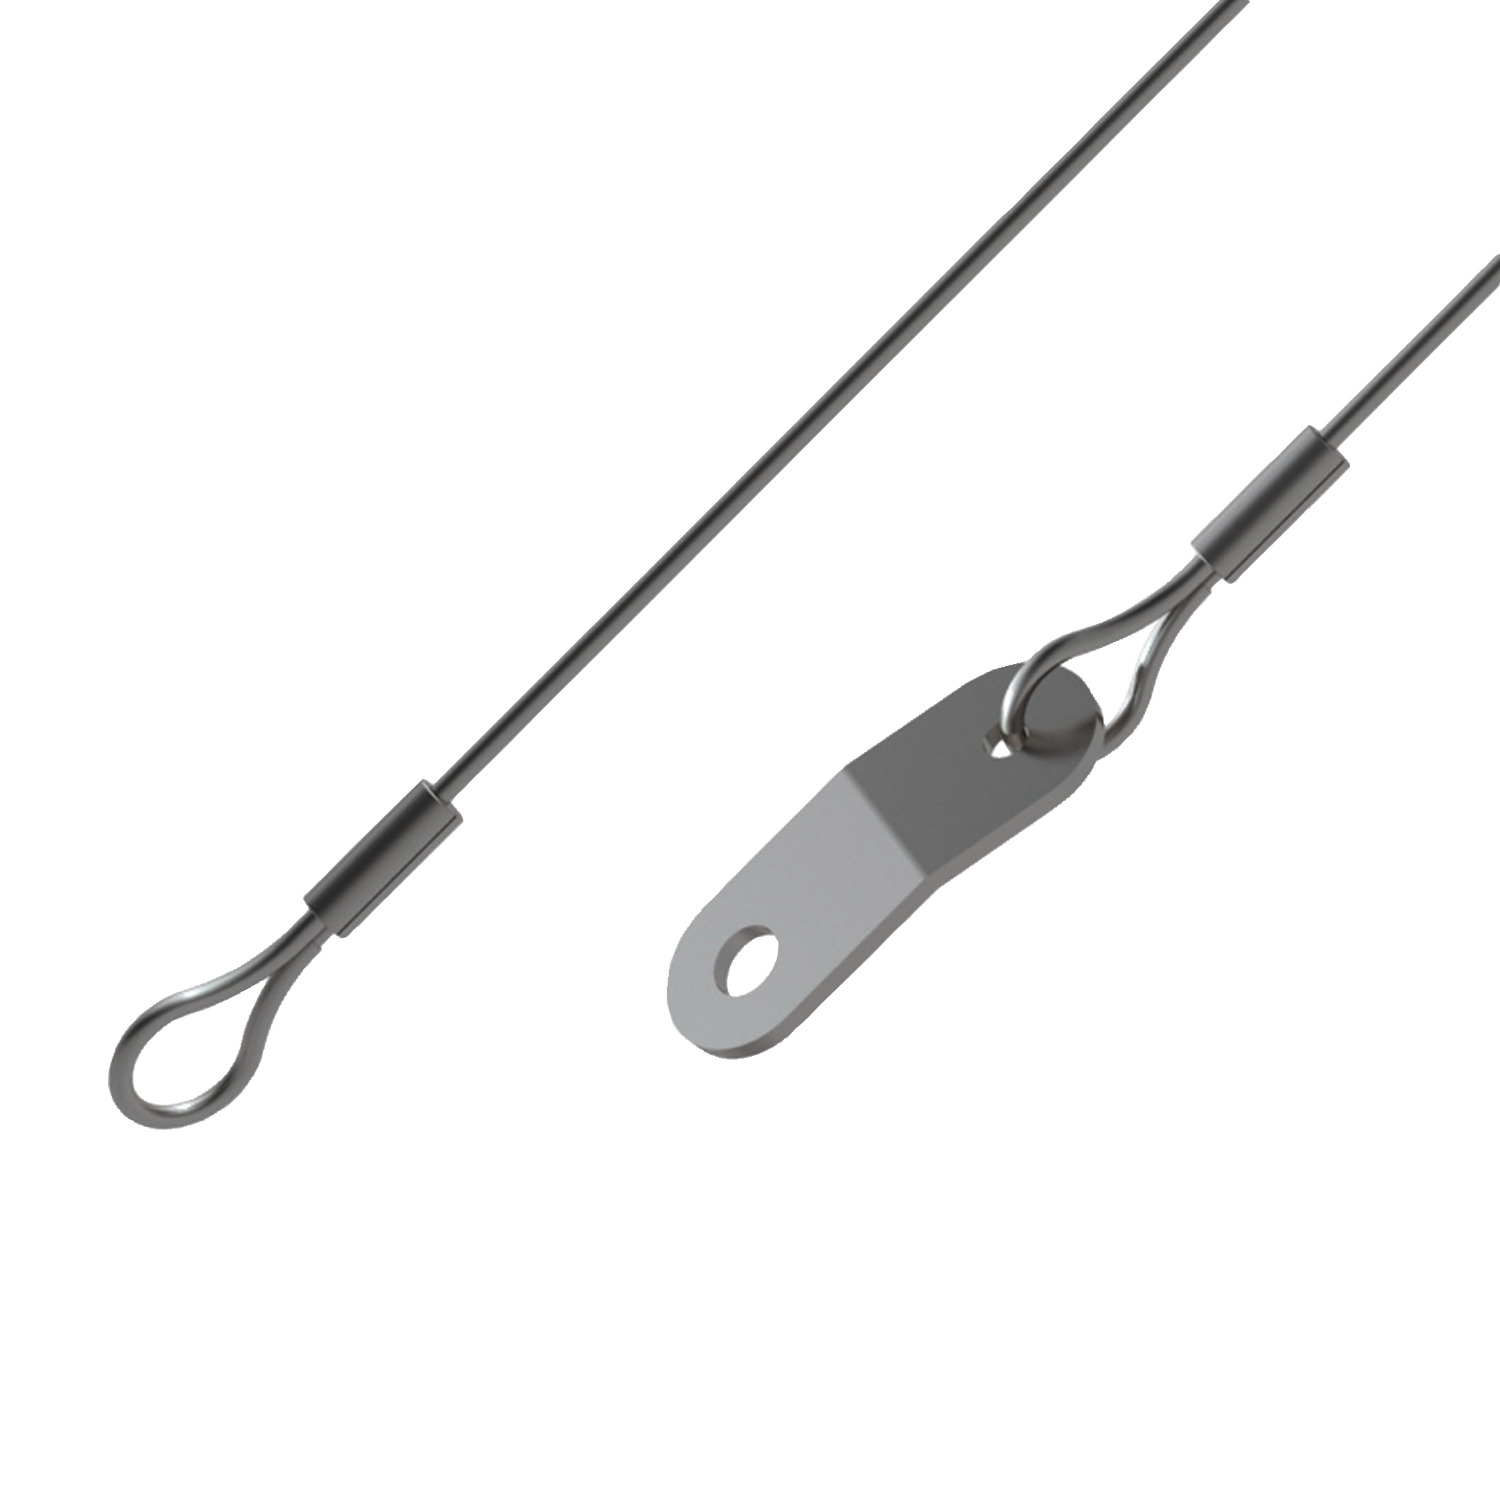 Product P1254, Lanyard - Loop to Rectangular Tab tab and crimps stainless steel / 